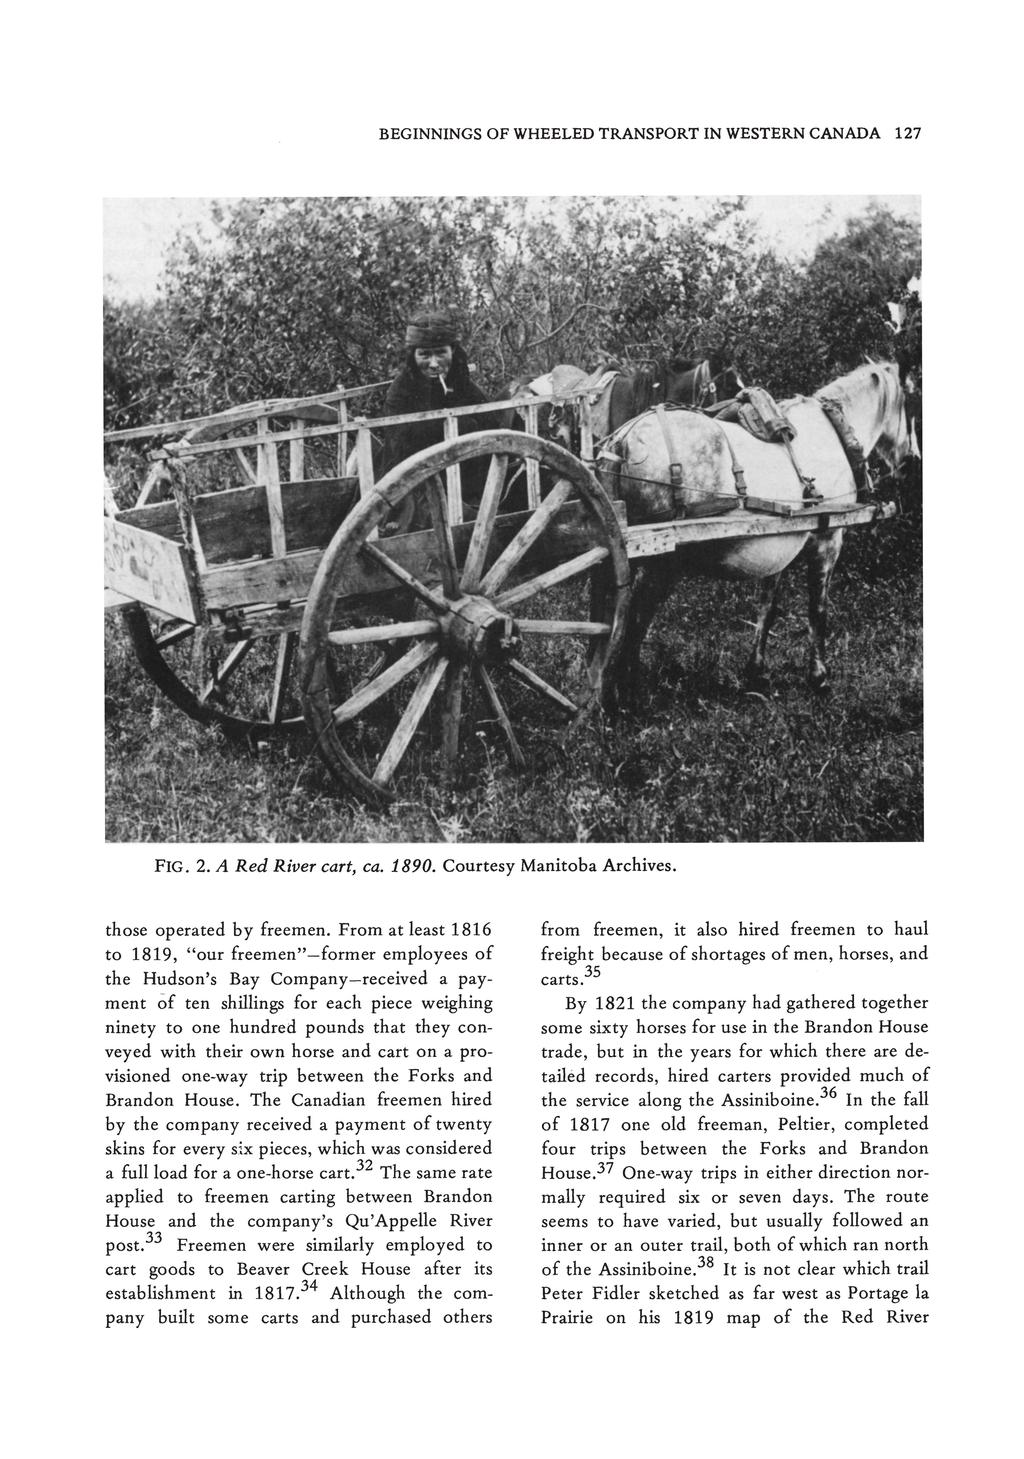 BEGINNINGS OF WHEELED TRANSPORT IN WESTERN CANADA 127 FIG. 2. A Red River cart, ca. 1890. Courtesy Manitoba Archives. those operated by freemen.